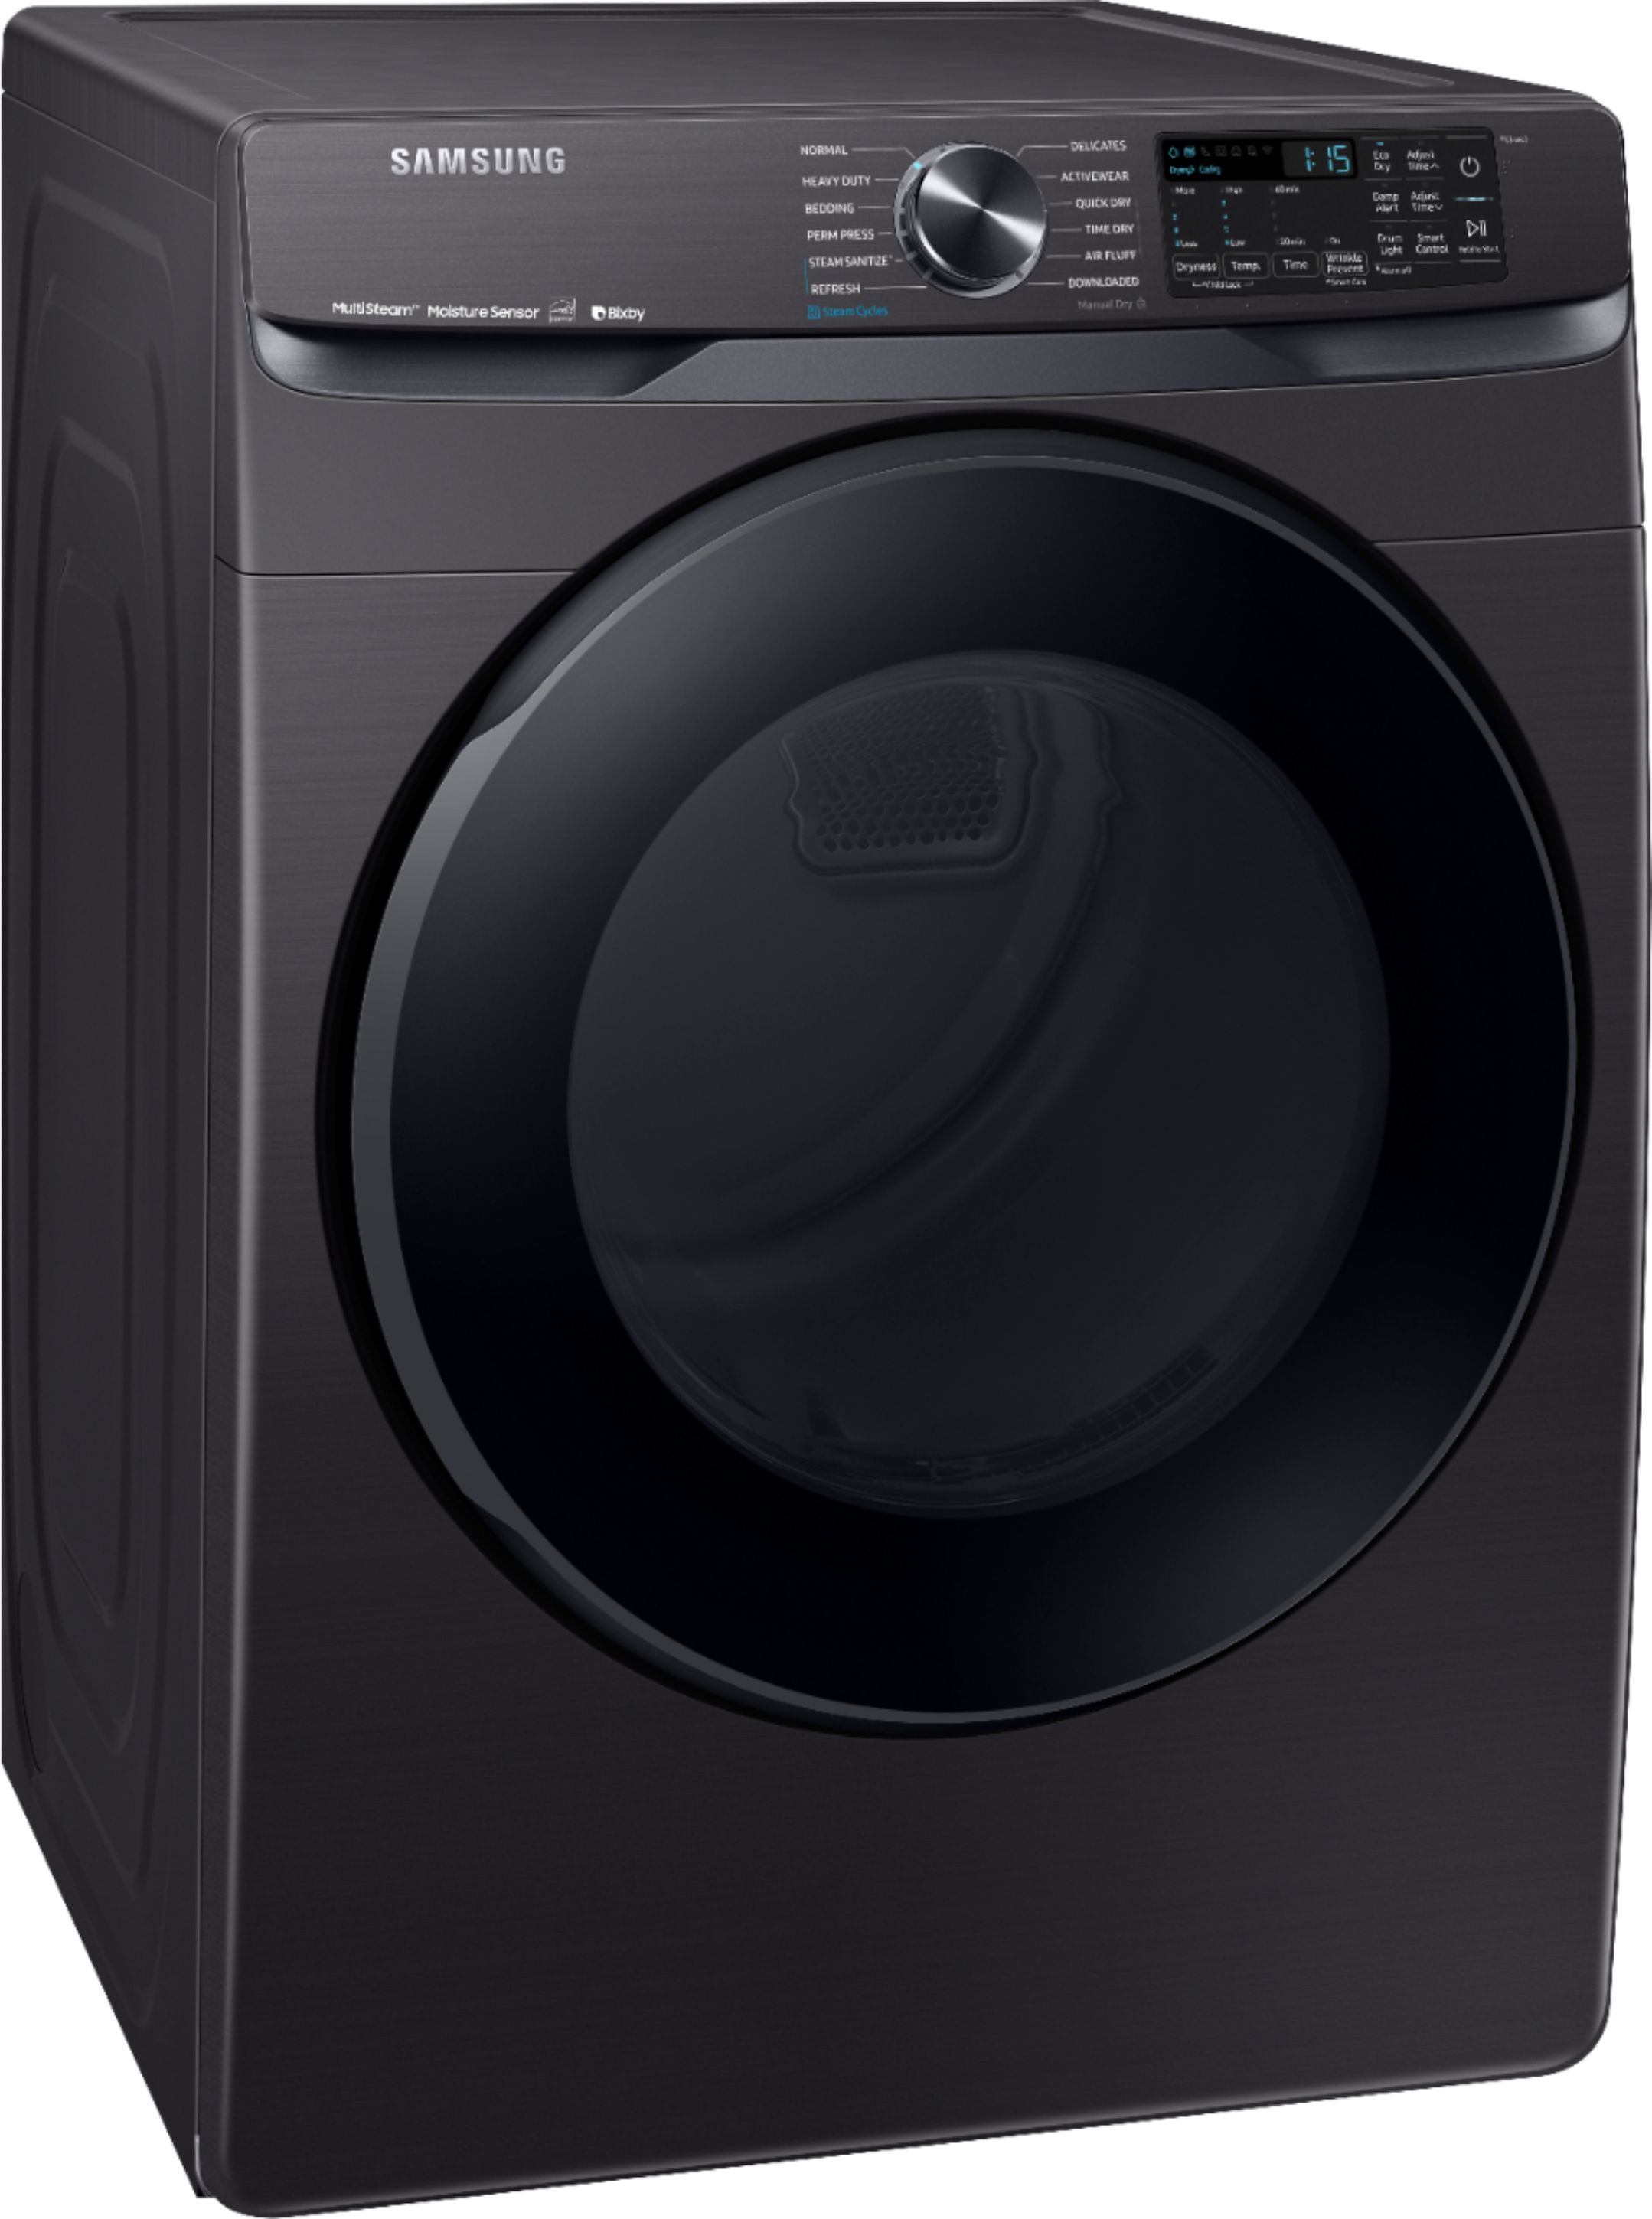 Angle View: Samsung - 7.5 Cu. Ft. Stackable Smart Gas Dryer with Steam and Sensor Dry - Black stainless steel